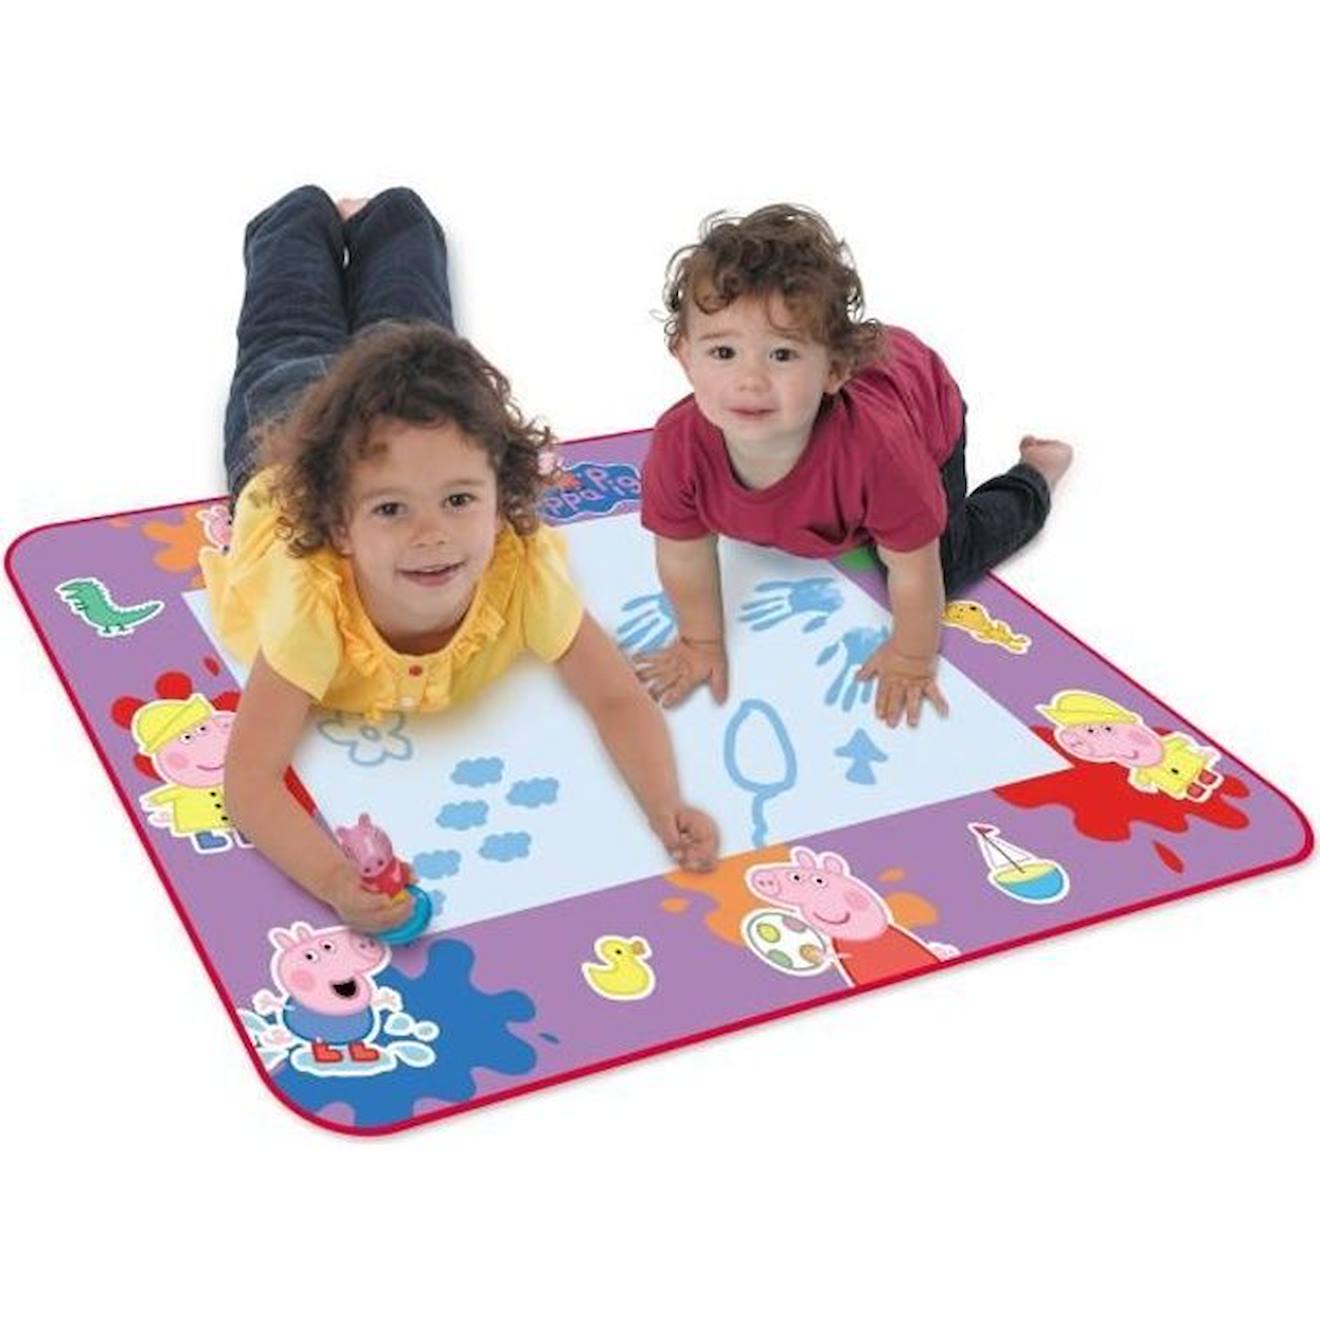 Tapis Aquadoodle Peppa Pig - Marque TOMY - Licence Peppa Pig - Pour Enfant  Fille - Multicolore rose - Tomy